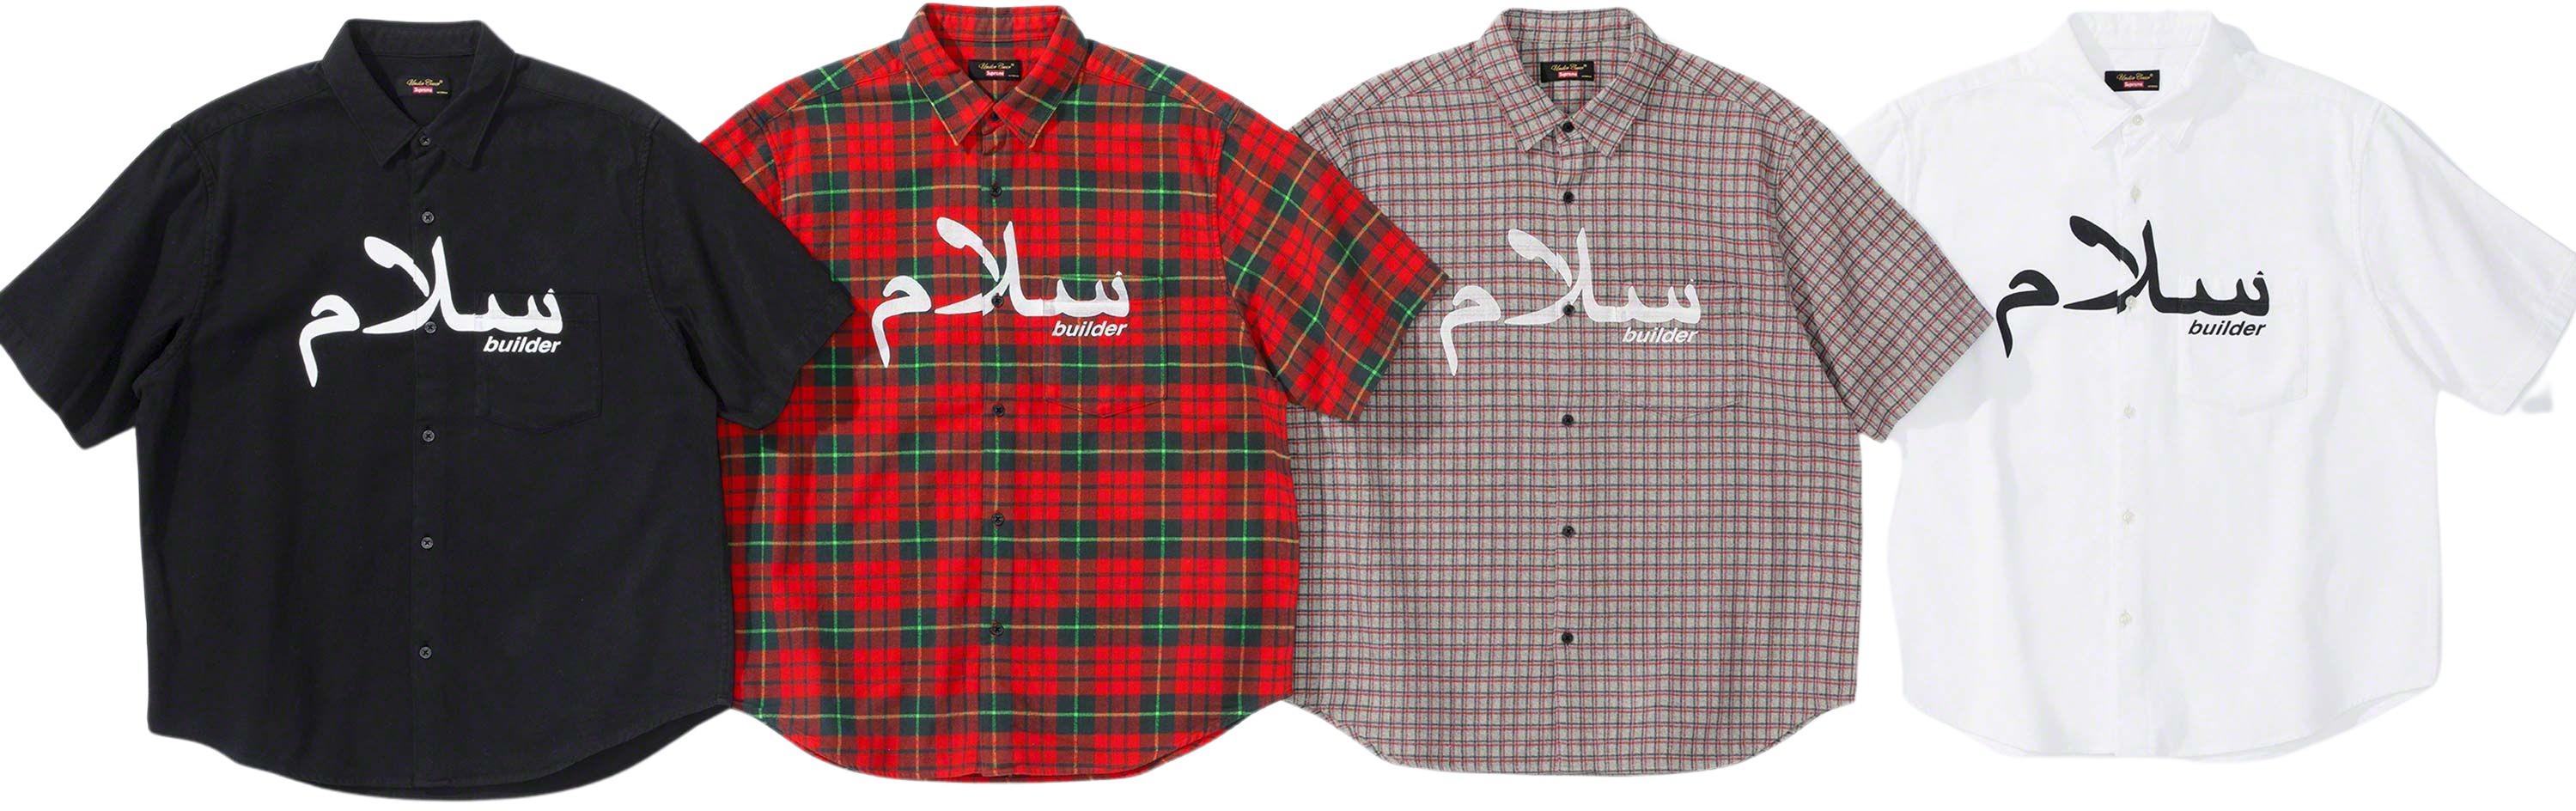 Supreme UNDERCOVER S/S Flannel Shirt Lシュプリーム